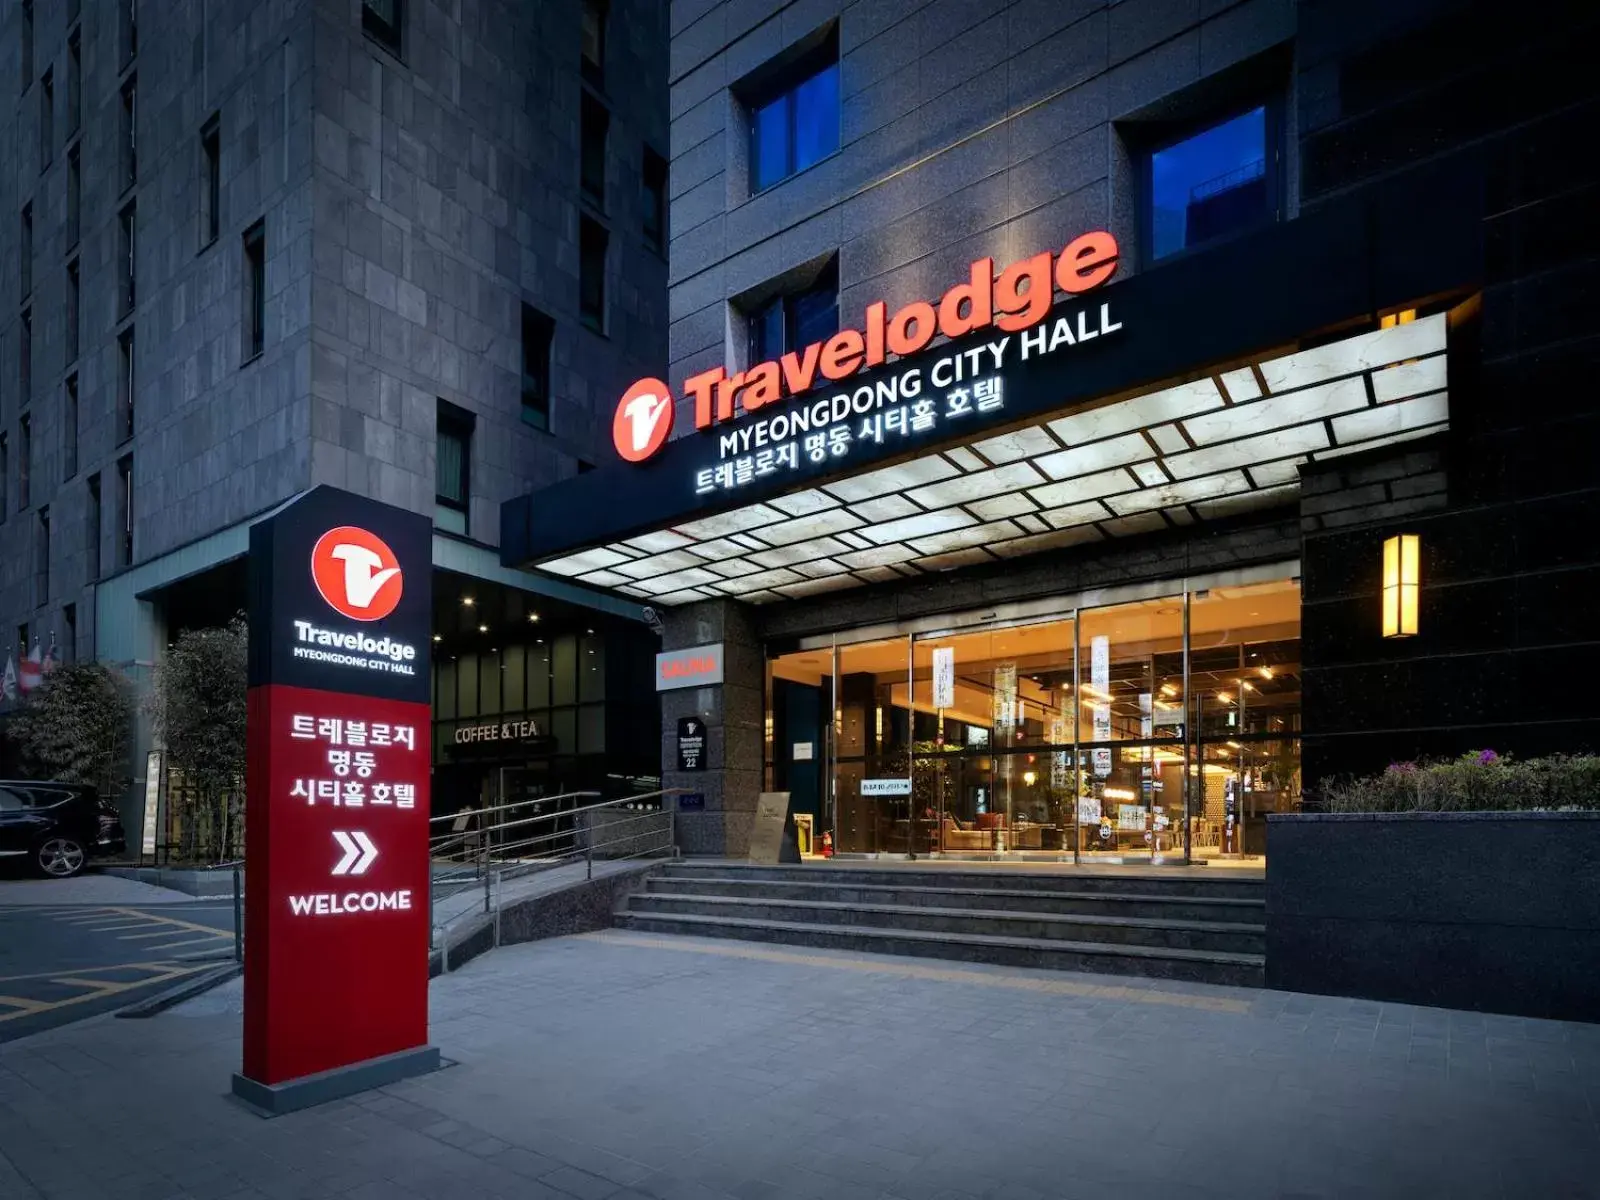 Property building in Travelodge Myeongdong City Hall